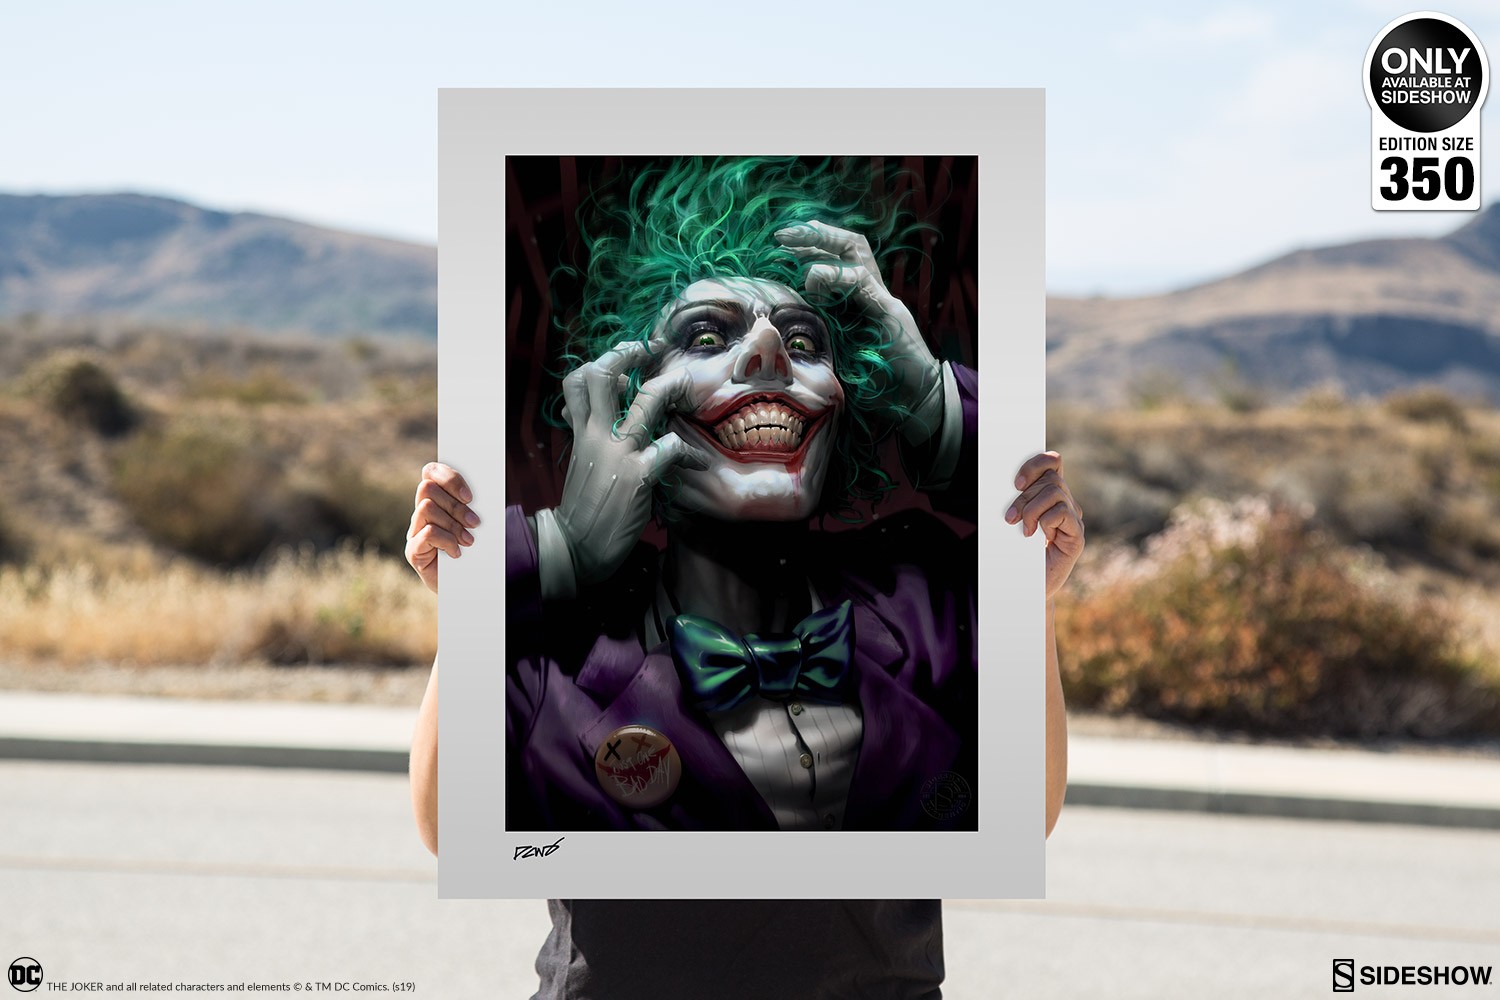 The Joker: Just One Bad Day Exclusive Edition View 6